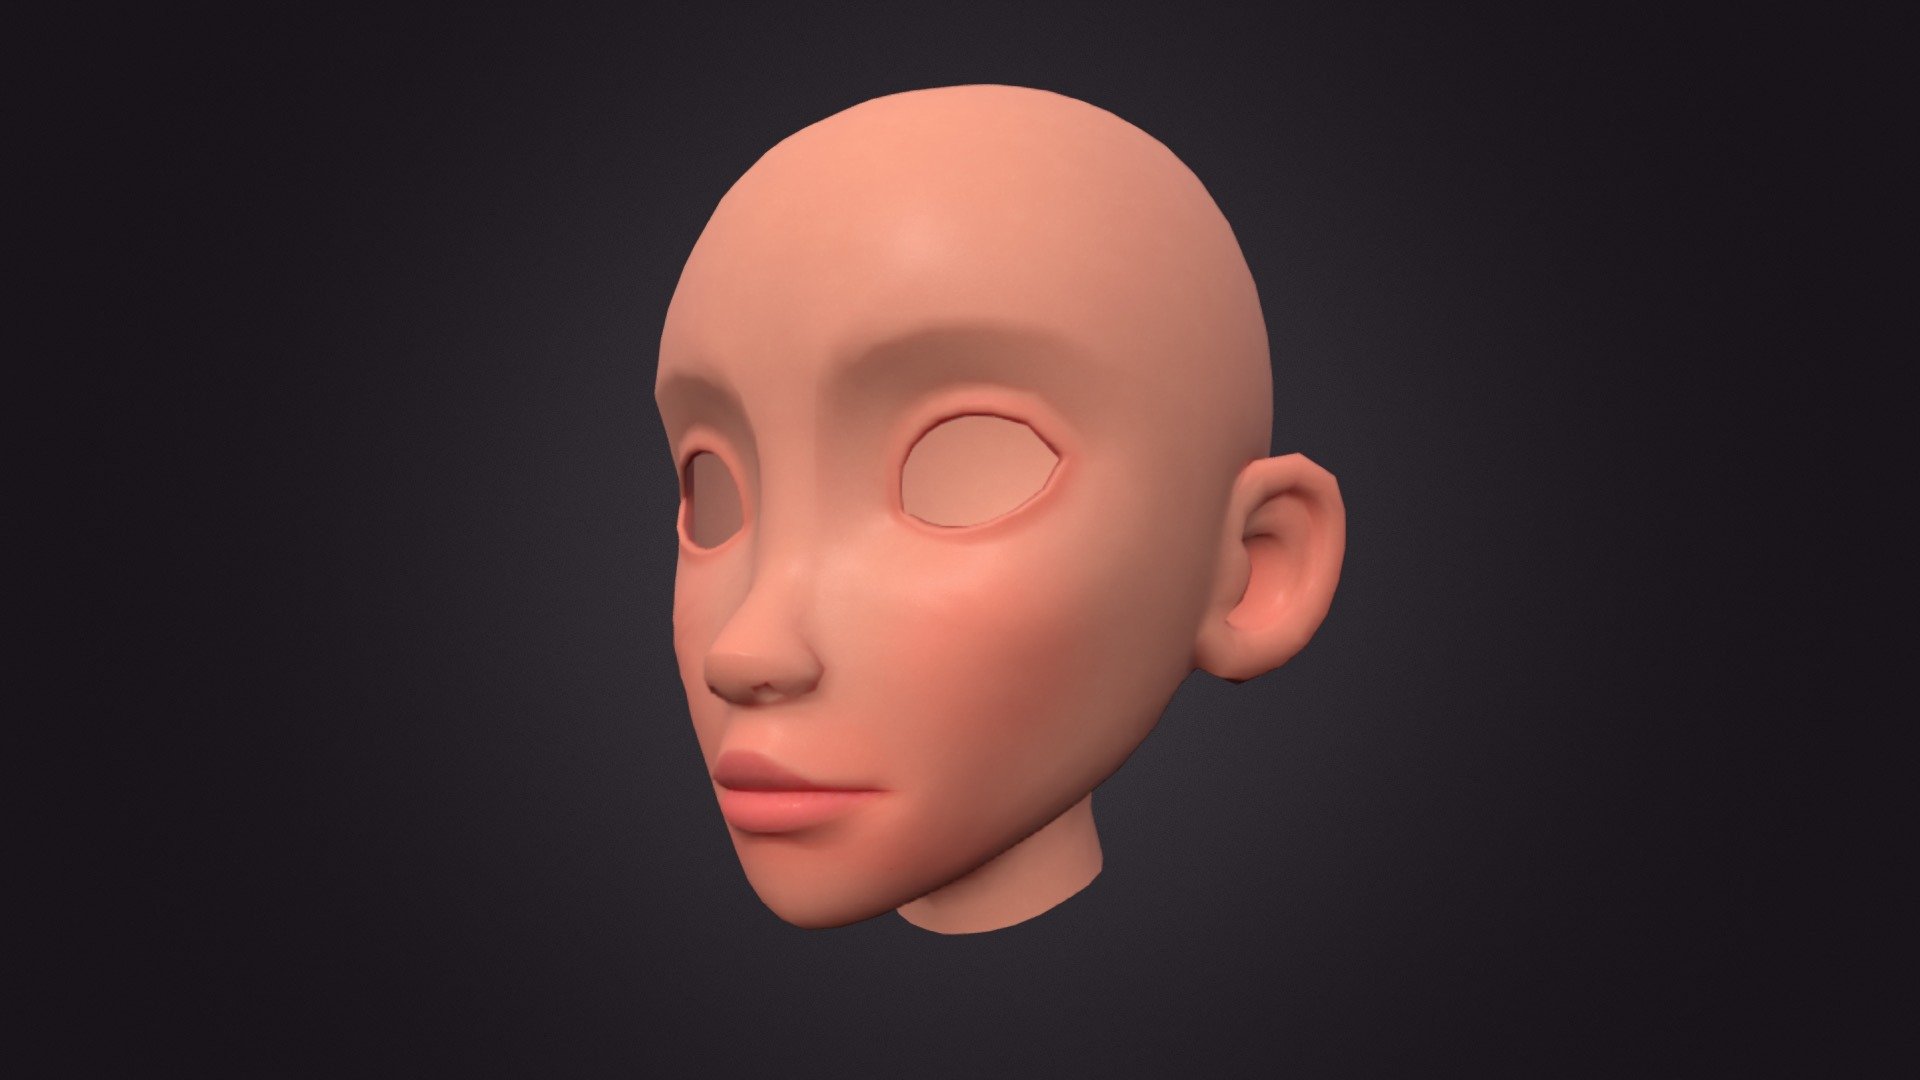 3D Cartoon Head. Very good model, with good geometry and textures, rendered with V-Ray in Maya. This model is really good to start a new character. Check the renders for more information. More formats available. PBR and low-poly model.

Textures size: 4096 x 4096
File's unit: metric, centimeters.

Enjoy! - Cartoon Head - Buy Royalty Free 3D model by nigam (@nigamxcreations) 3d model